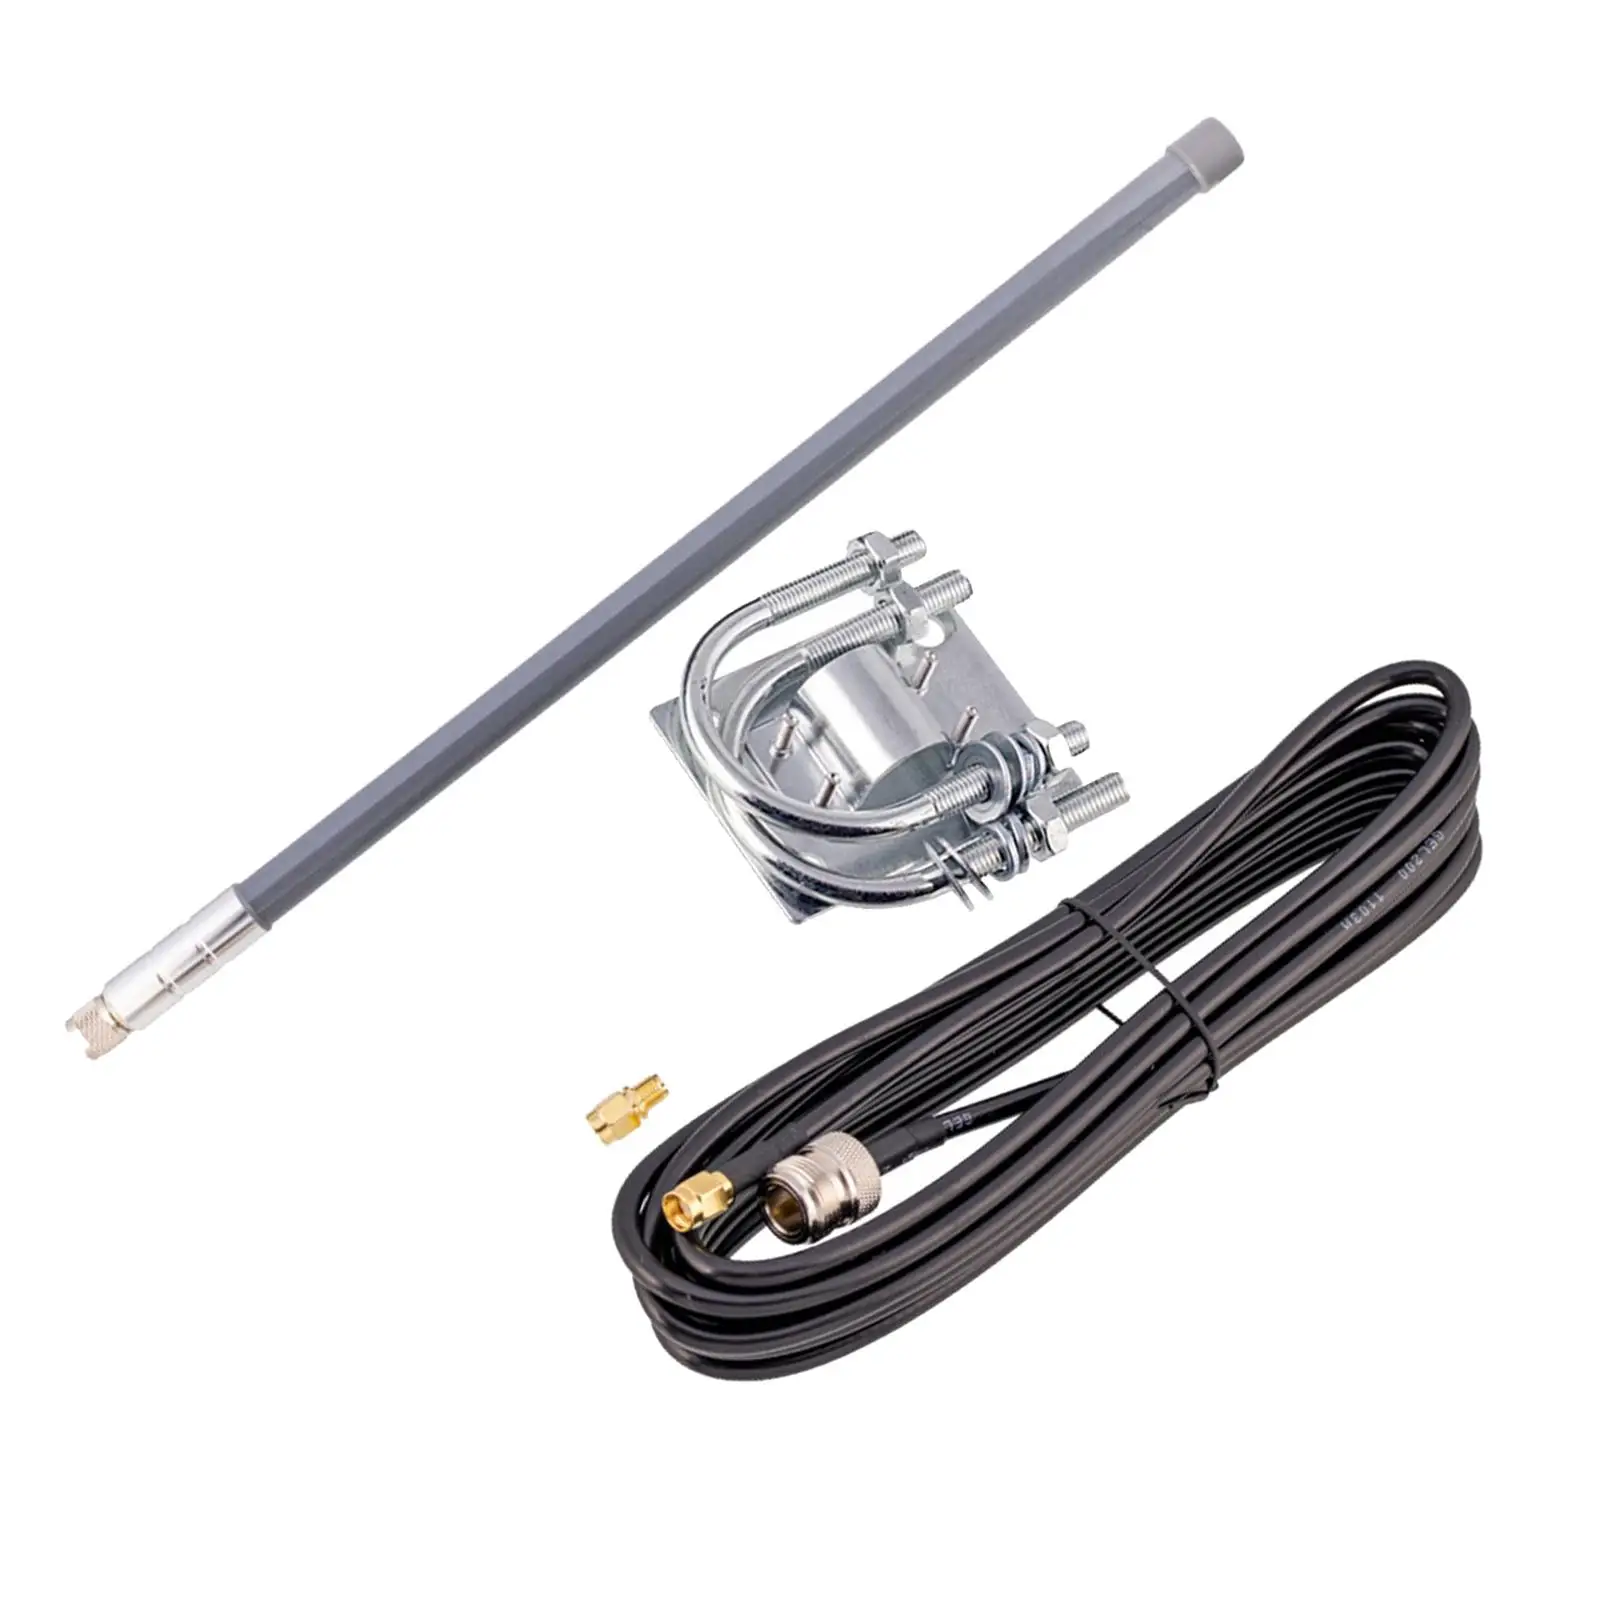 Waterproof Fiberglass Antenna RG58 Female-To-Rp-Sma 860-930MHz for City Monitoring Outdoor Environmental Monitoring